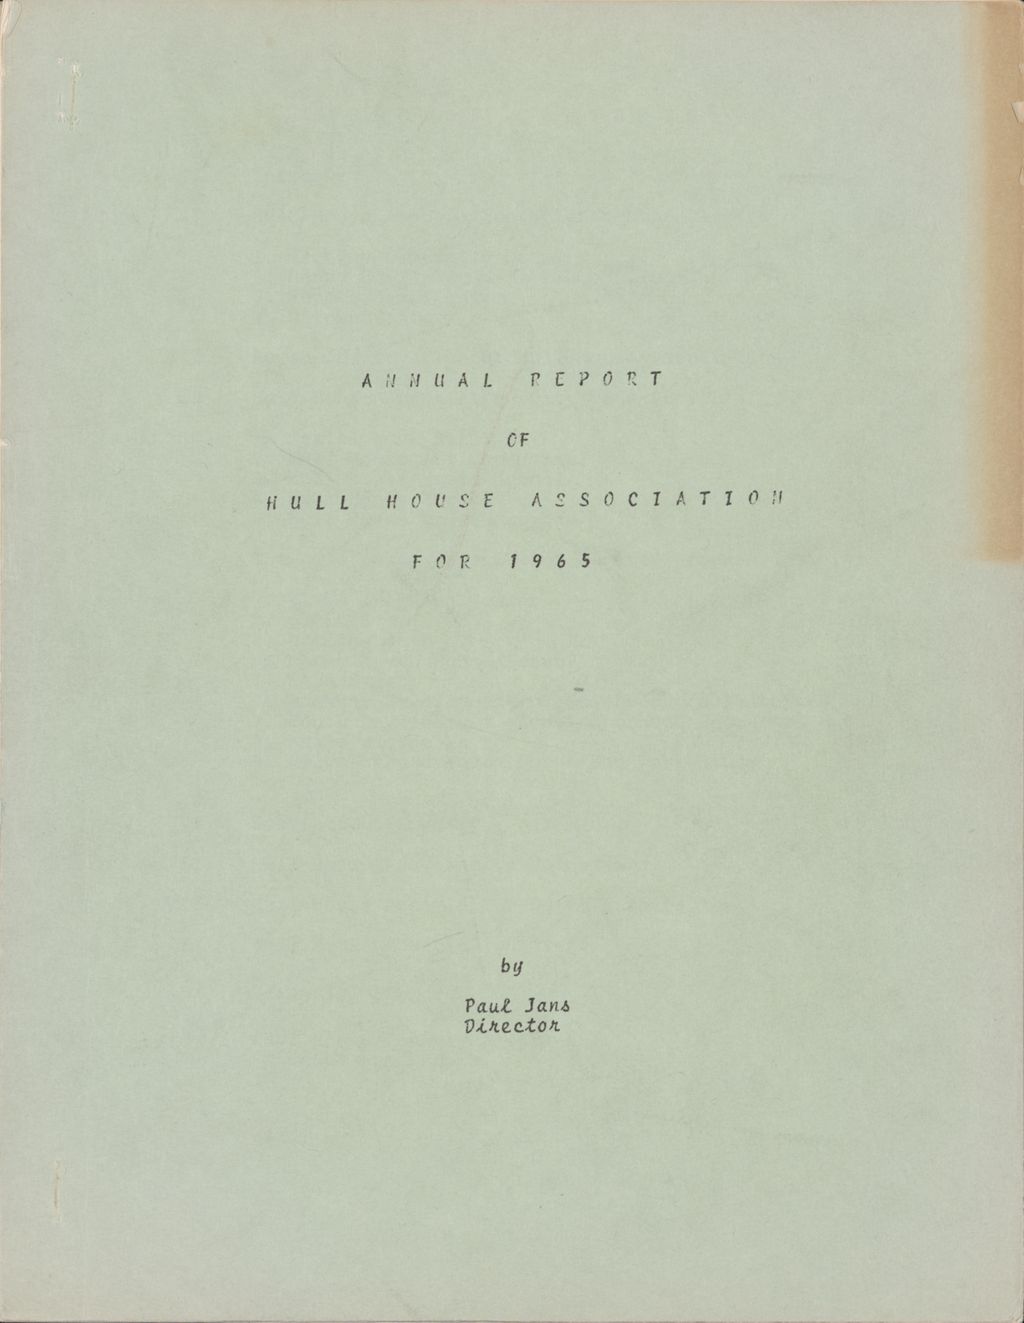 Miniature of Hull House Association, Annual Report, 1965